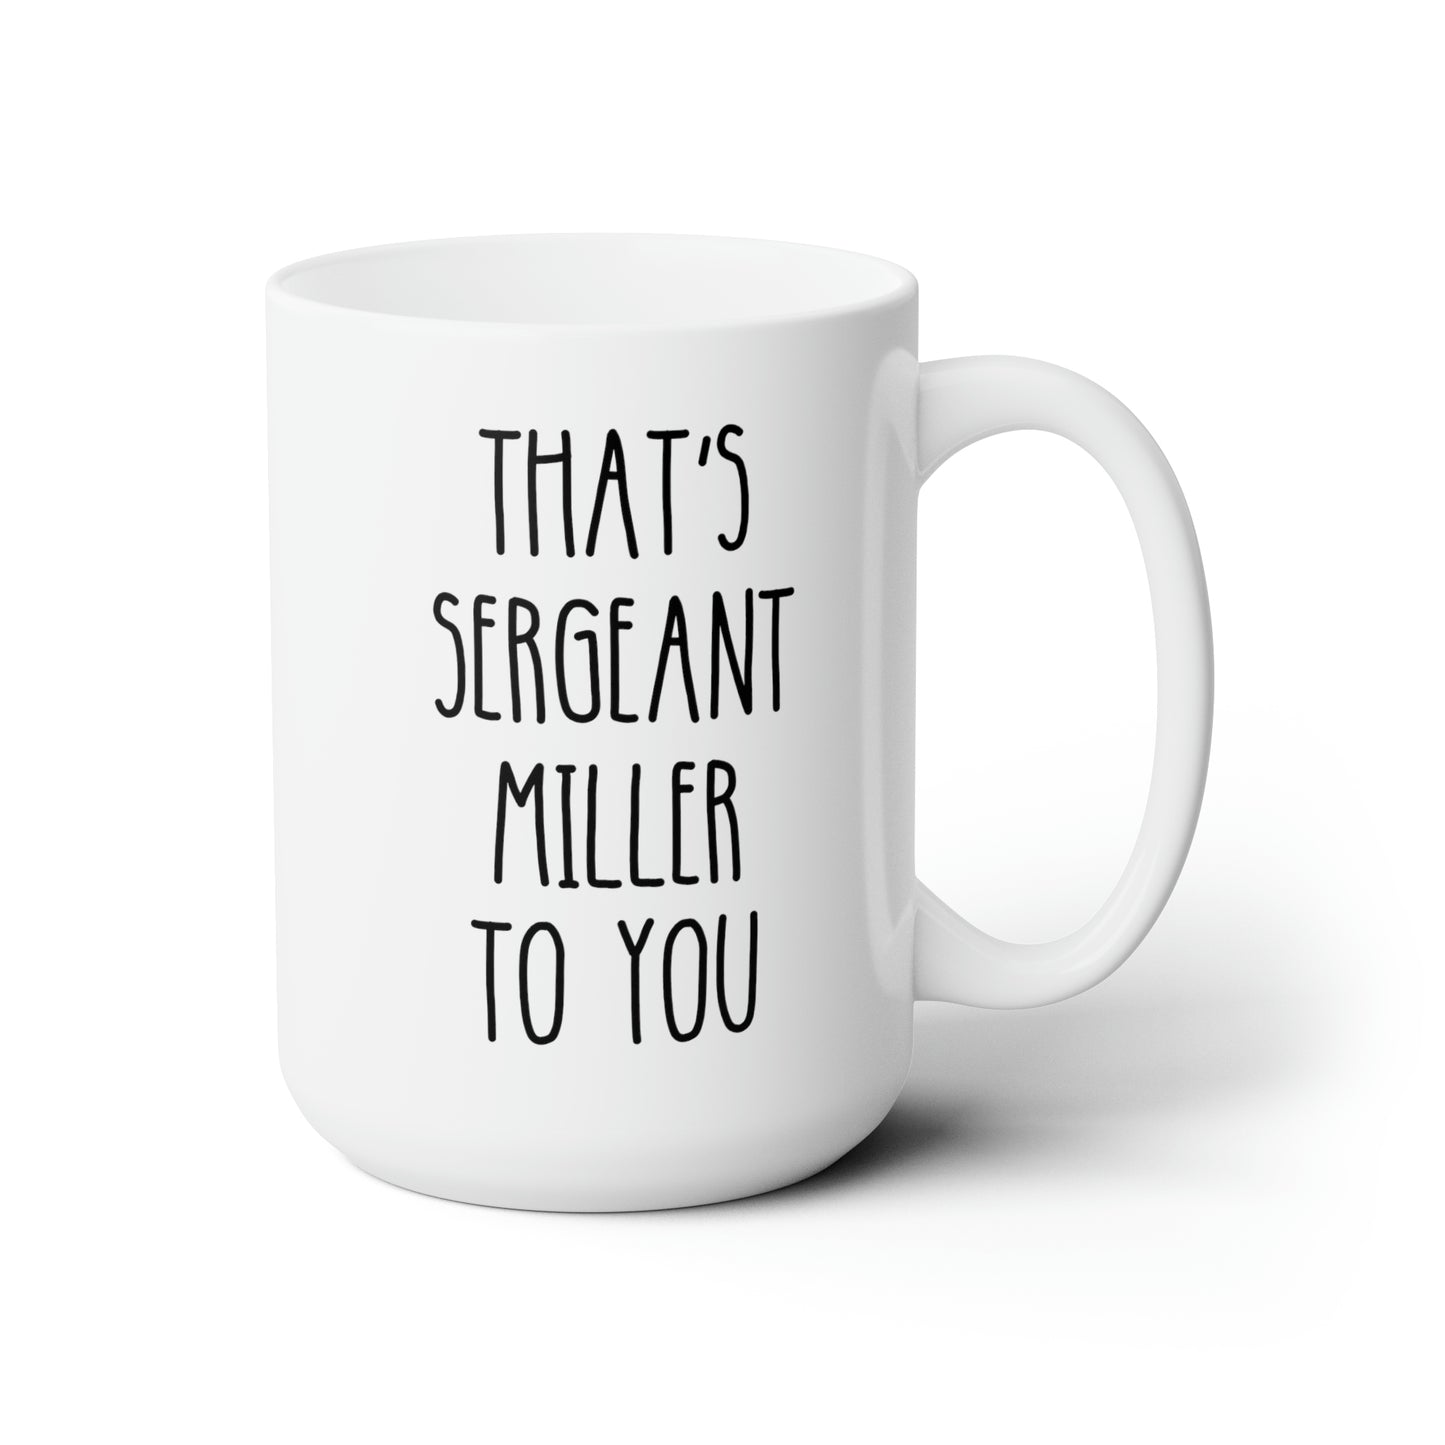 Thats Sergeant Miller To You 15oz white funny large coffee mug gift for sergeant cop police promotion appreciation gift waveywares wavey wares wavywares wavy wares